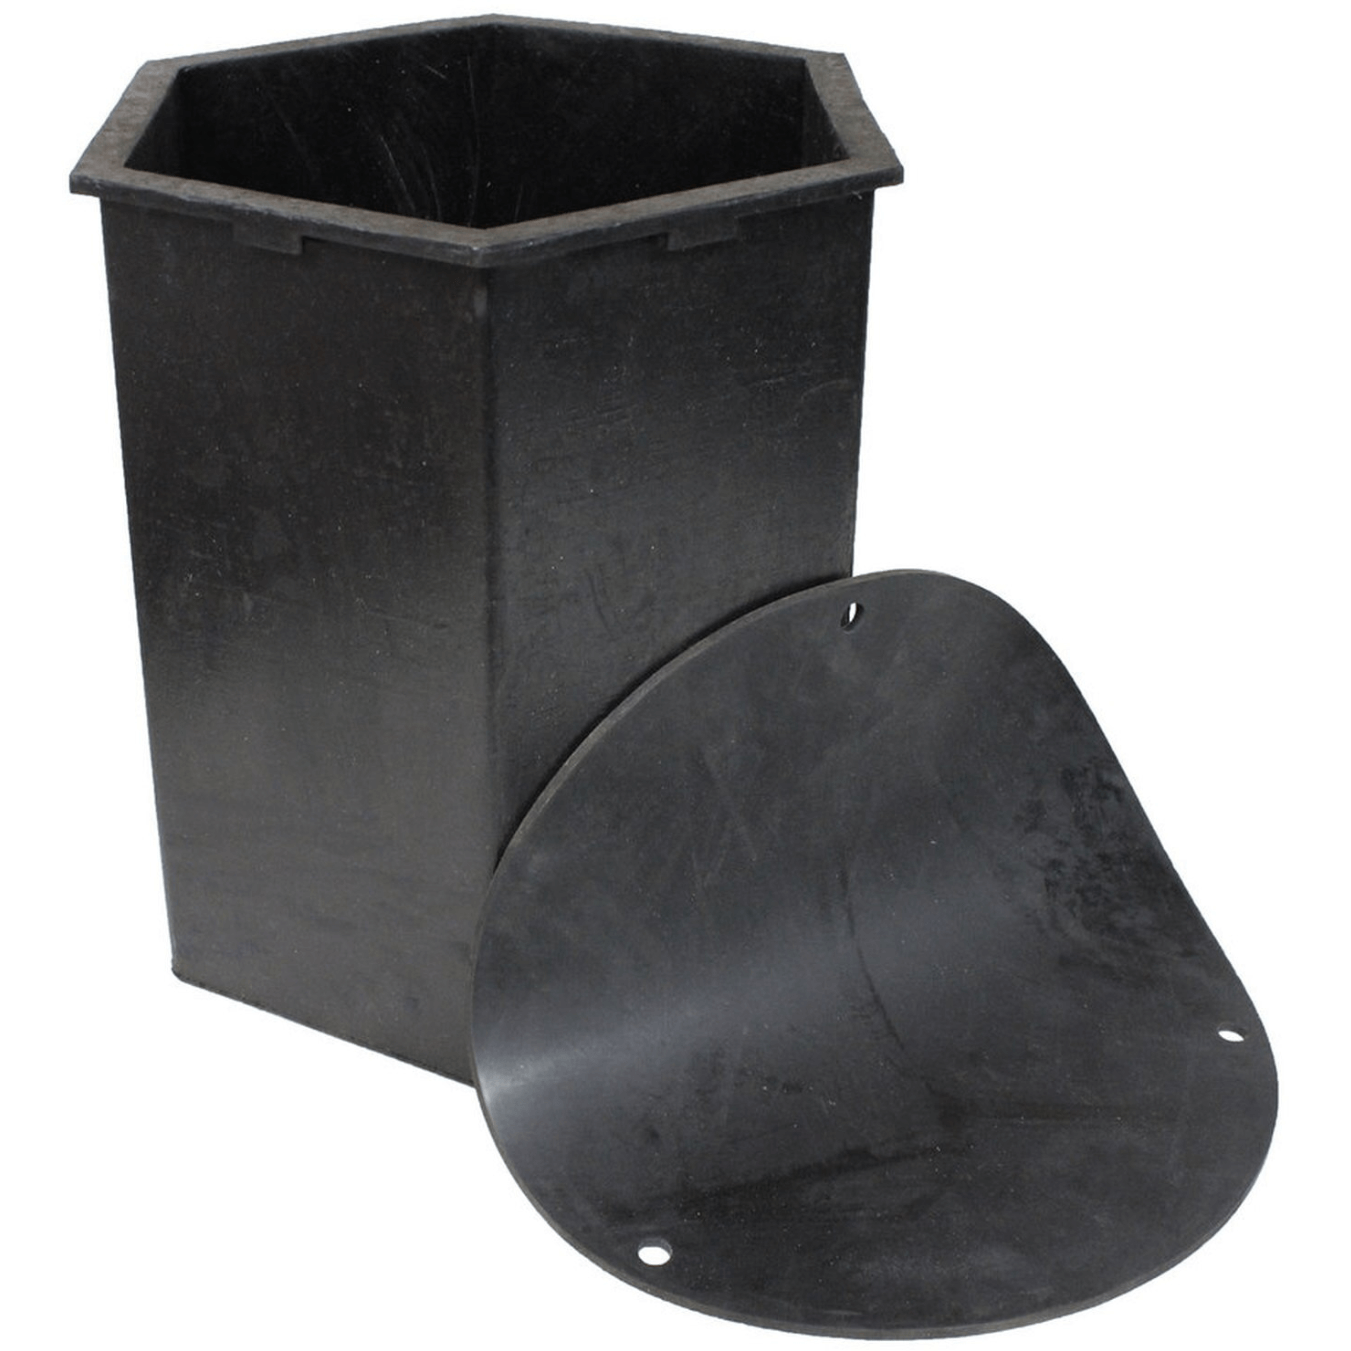 Liner and Gasket for Covington's 40 Pound Rock Tumbler